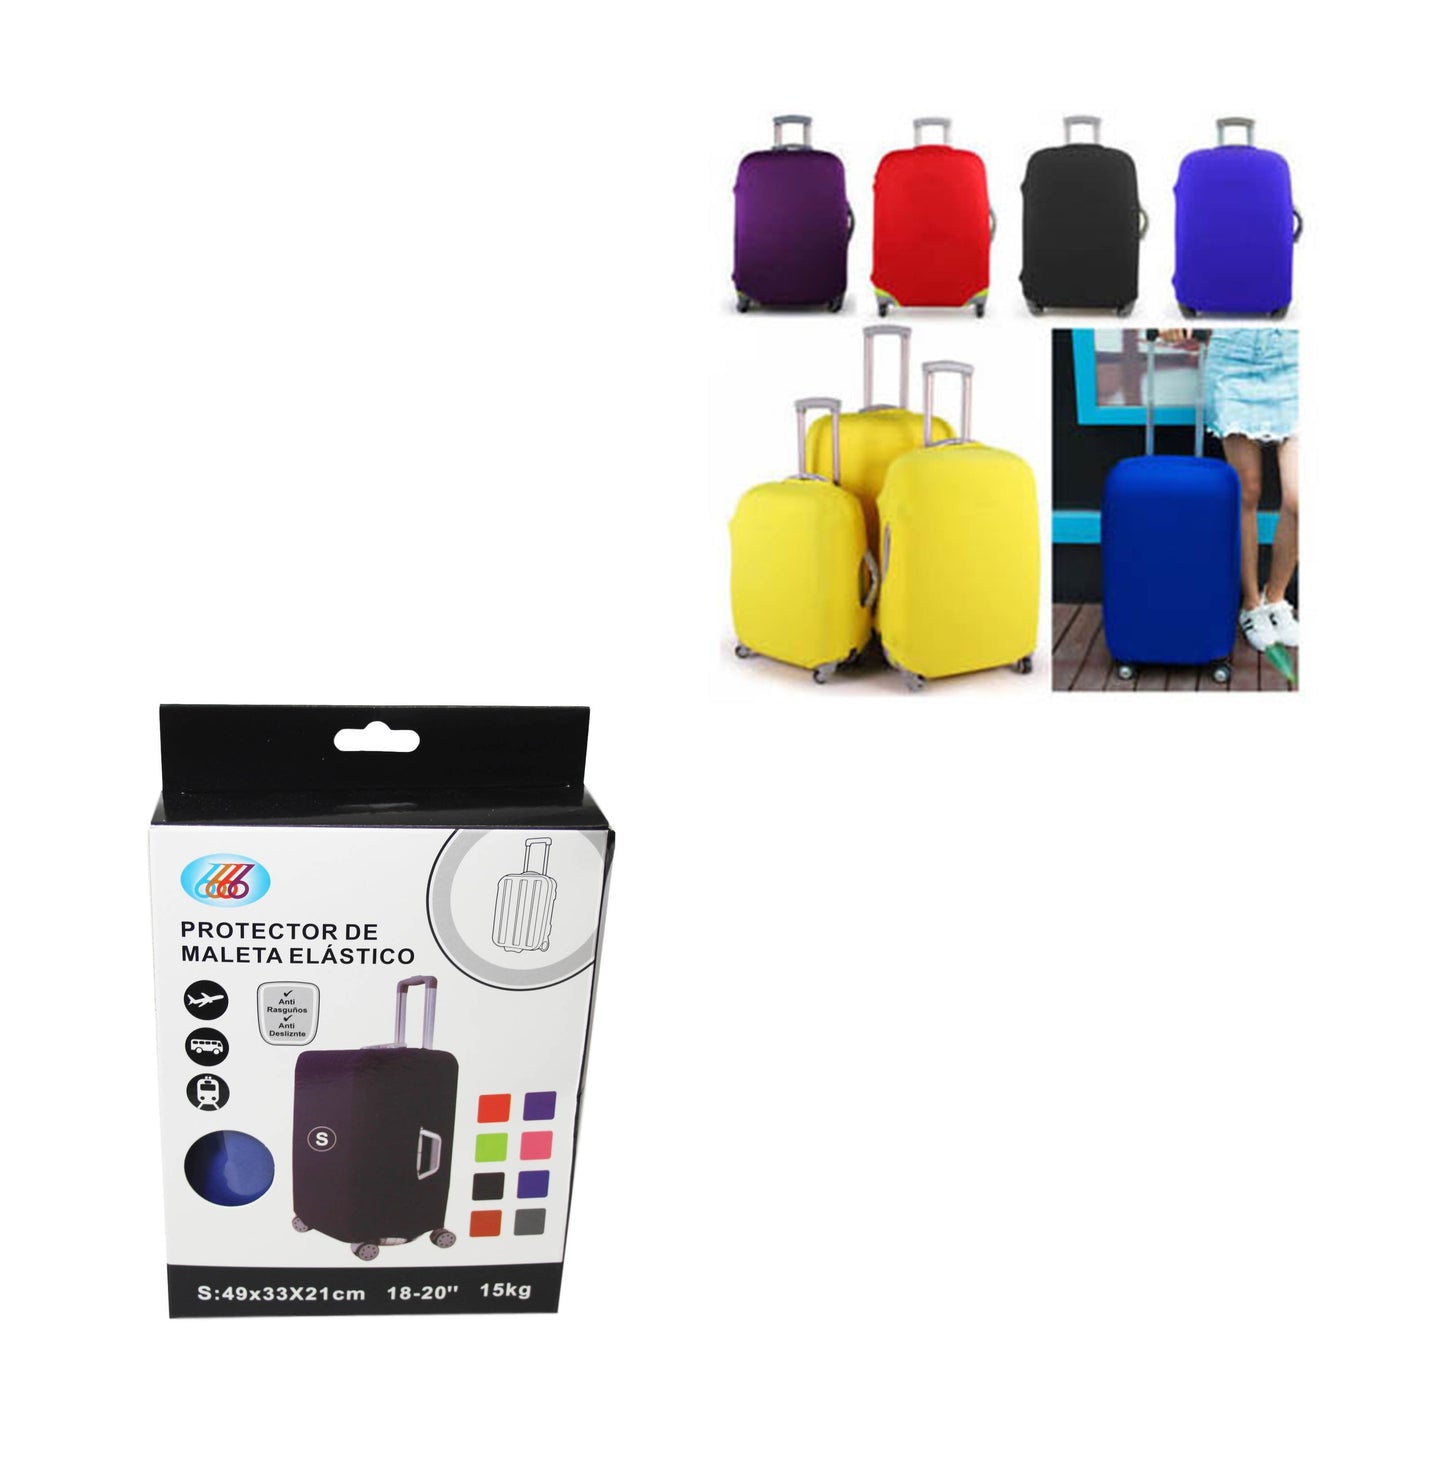 (S)Travel Suitcase Luggage Cover Protector Elastic Stretchy Cover Assorted Colours 49x33x21cm 6533 (Parcel Rate)